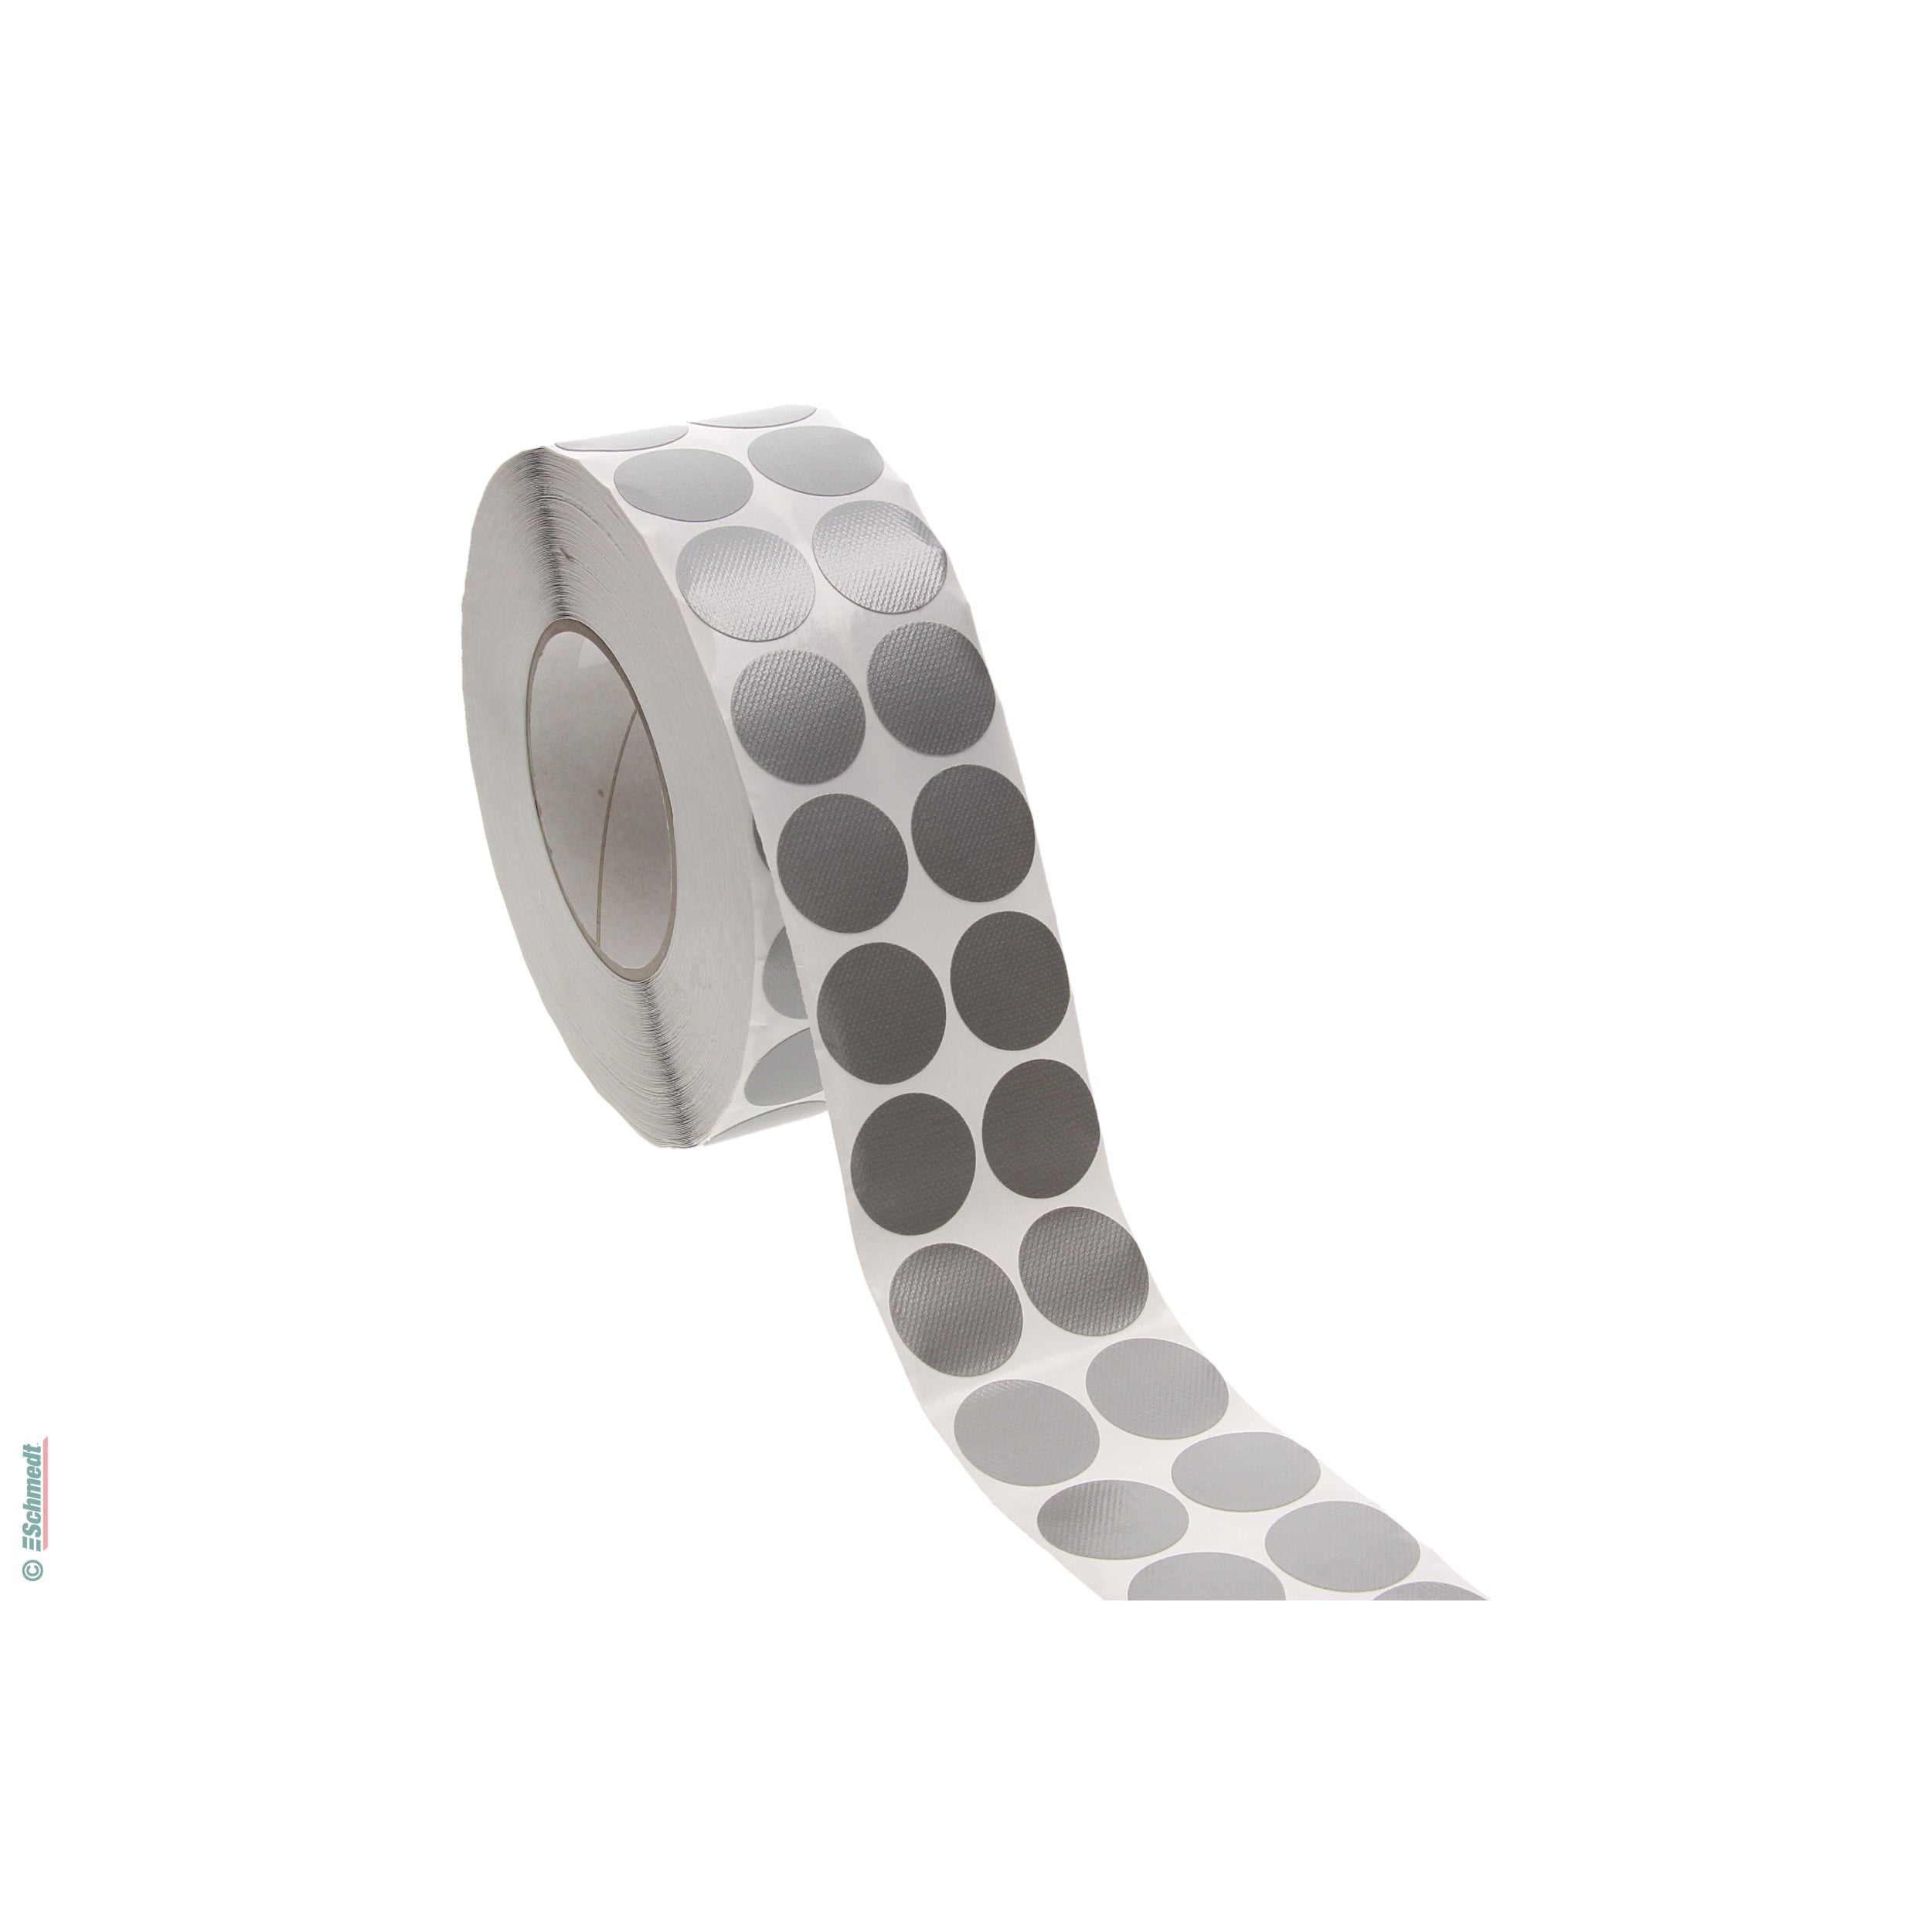 One-sided adhesive circles made of cloth - round, grey, on rolls - Ø 30 mm - serve as sealing labels for packagings, boxes, mailings, flyers...